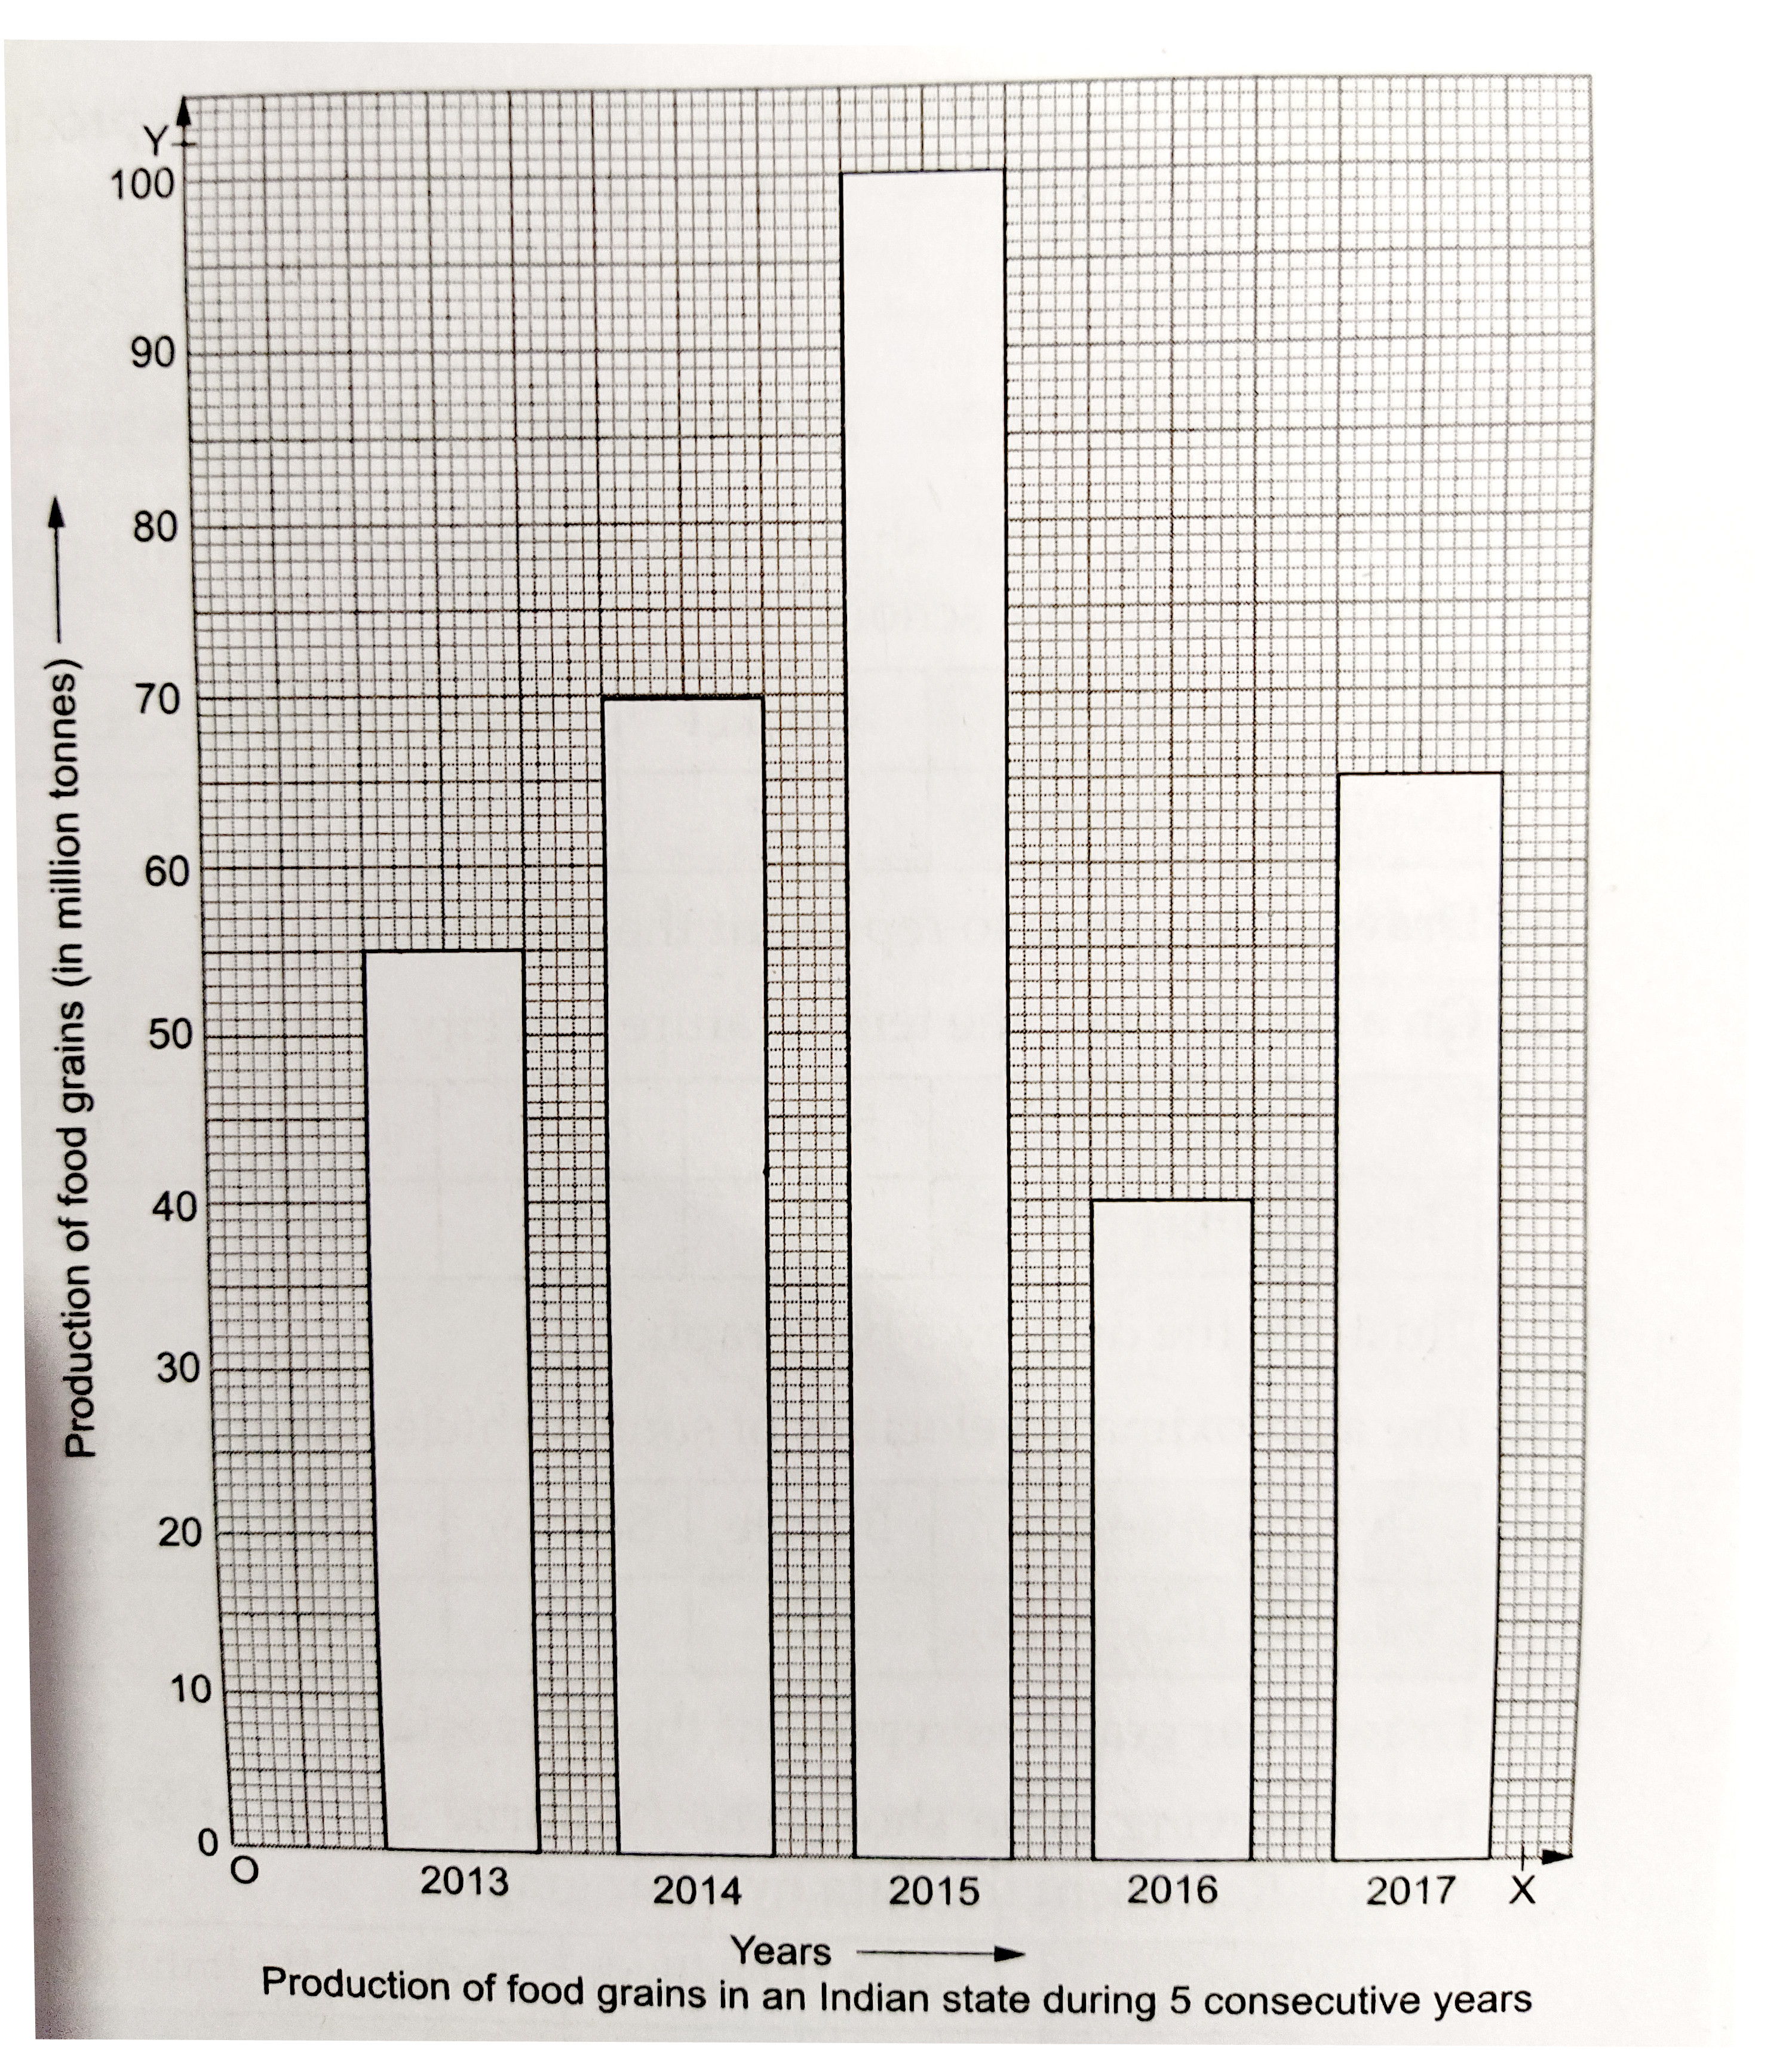 Read the given bar graph and answer the questions given below:   (i) What information is given by the bar graph?   (ii) In which year was the production maximum?   (iii) After which year was there a sudden fall in the production?   (iv) Find the ratio between the maximum production and the minimum production during the given period.